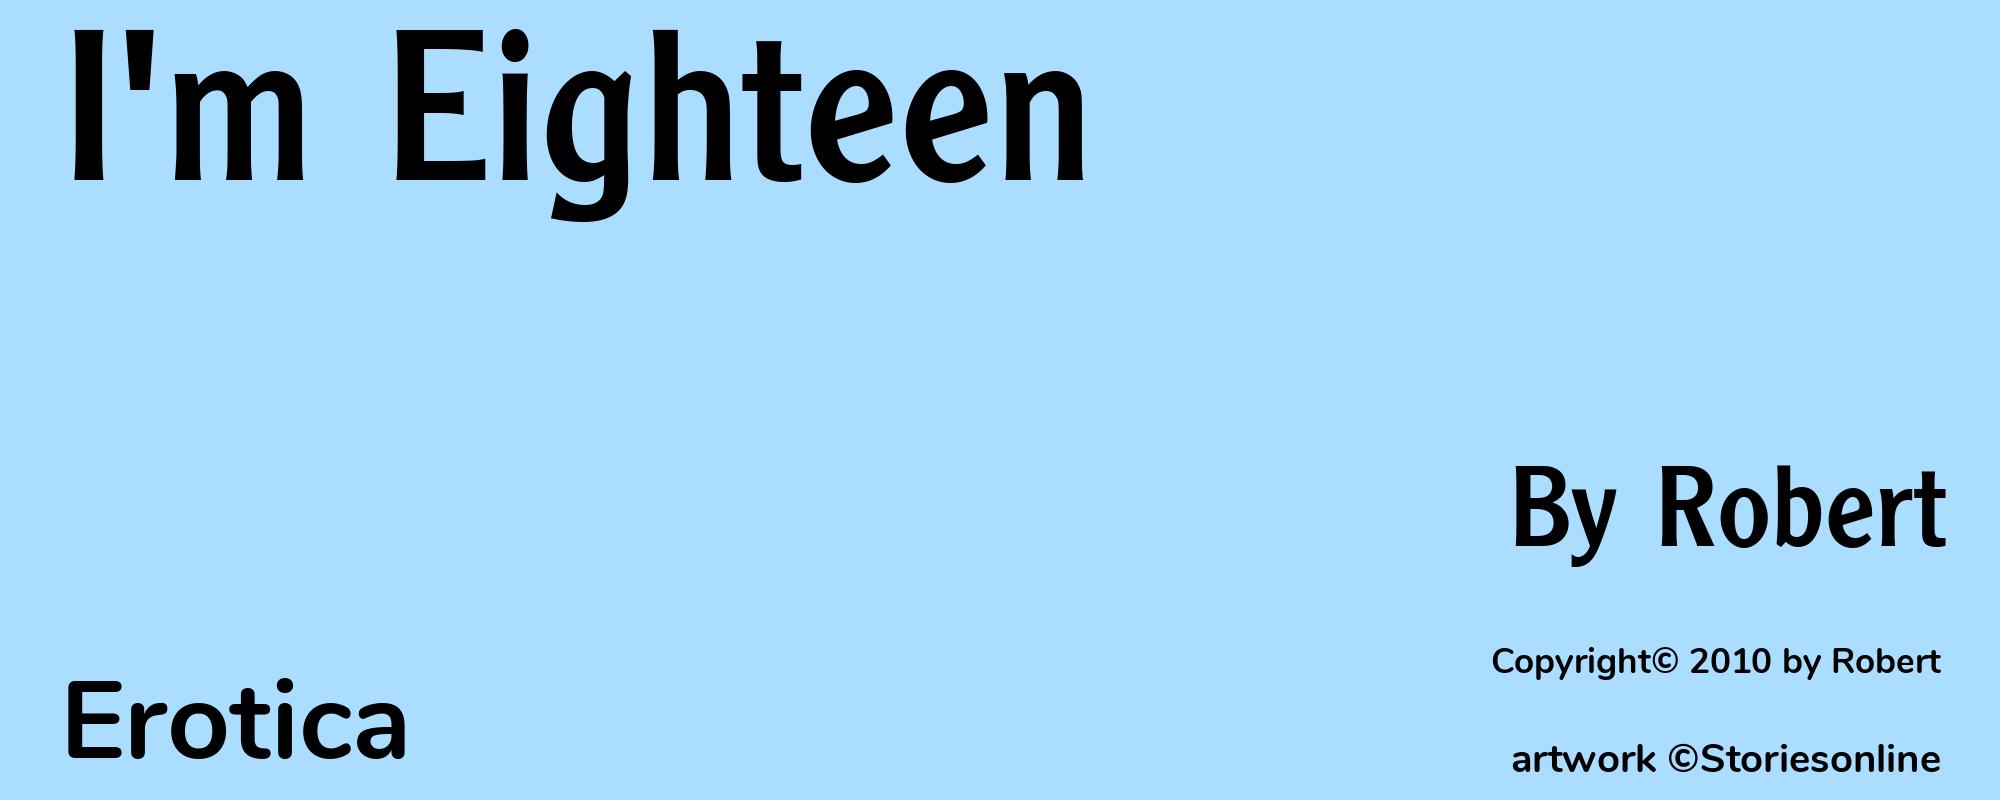 I'm Eighteen - Cover